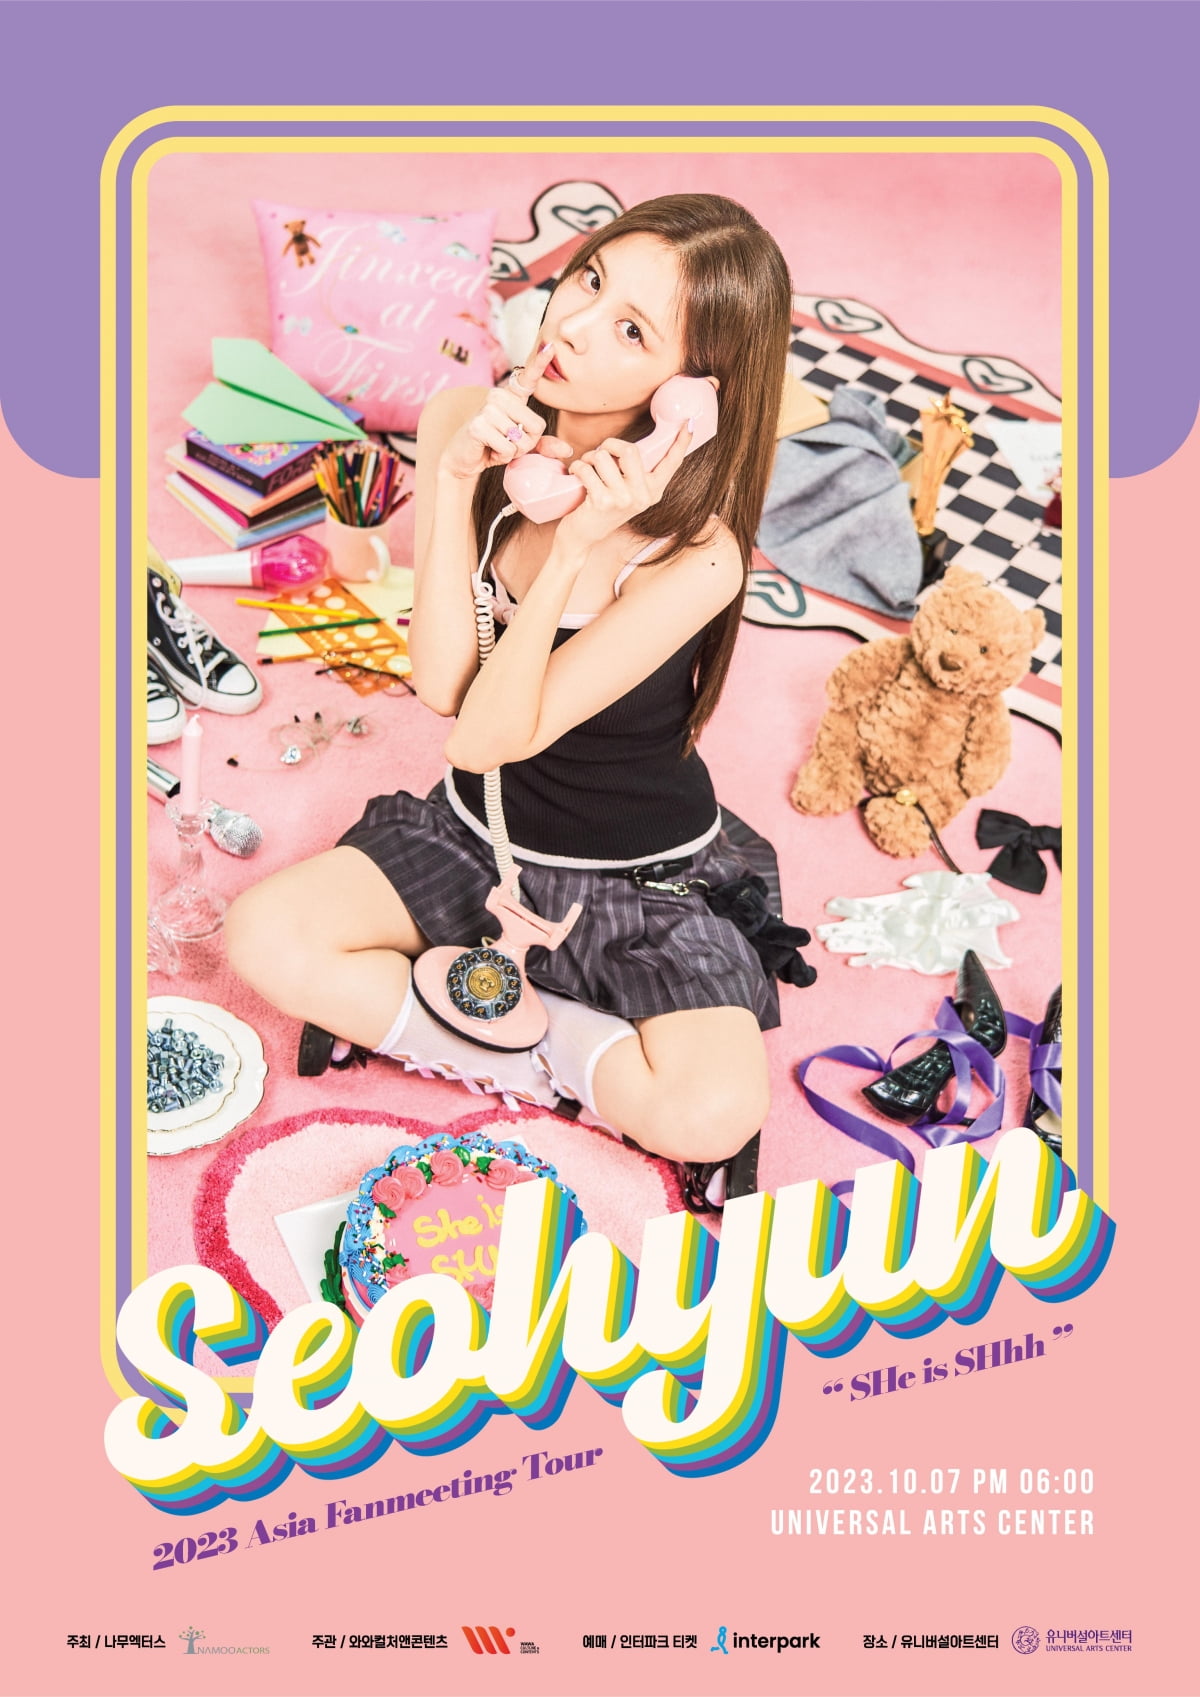 Seohyun holds fan meeting for the first time in 5 years in Seoul on October 7th